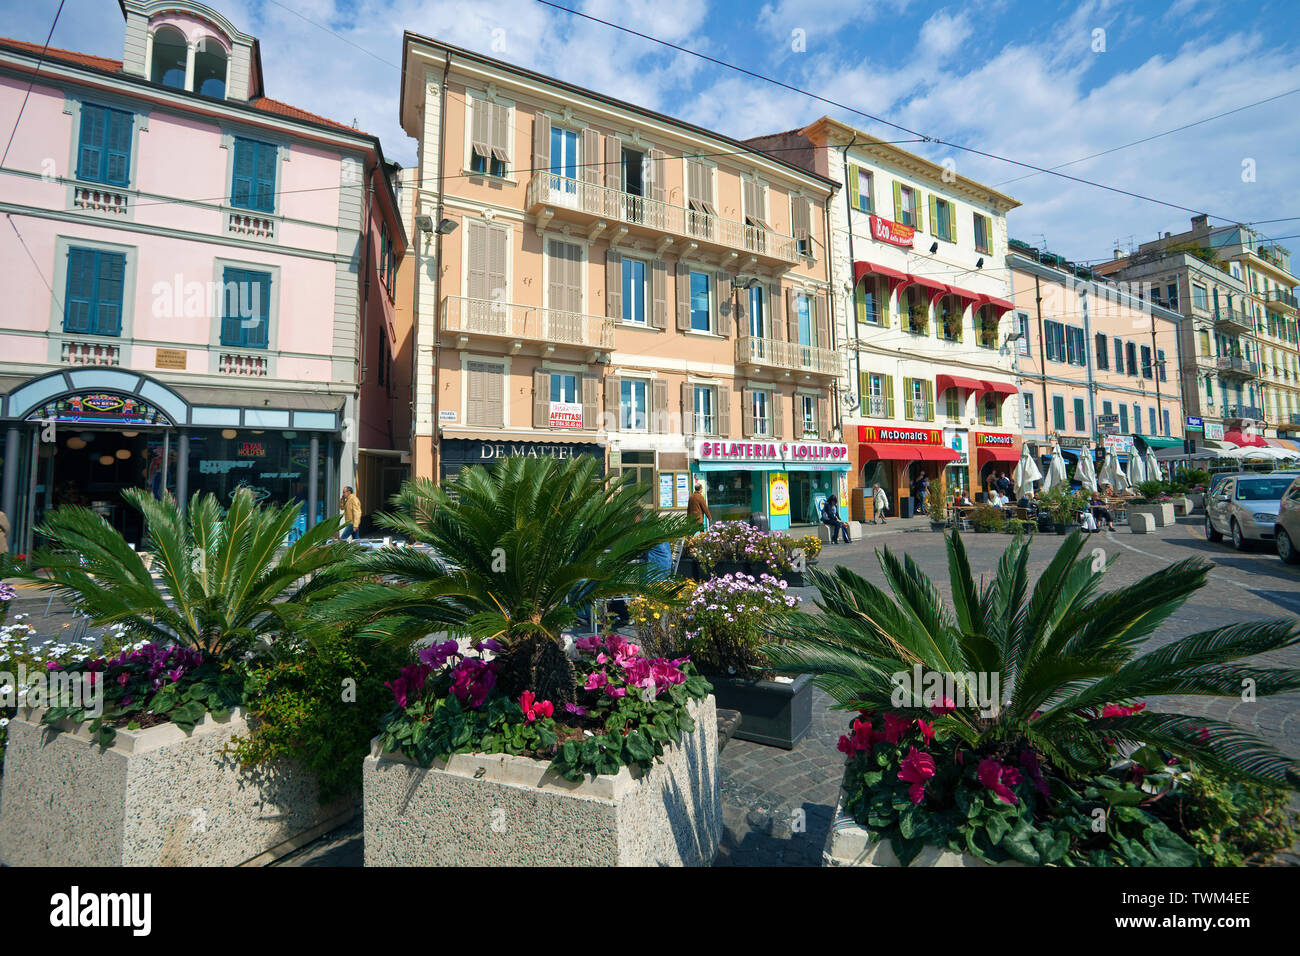 Houses with shops in San Remo, harbour town at the ligurian coast, Liguria, Italy Stock Photo